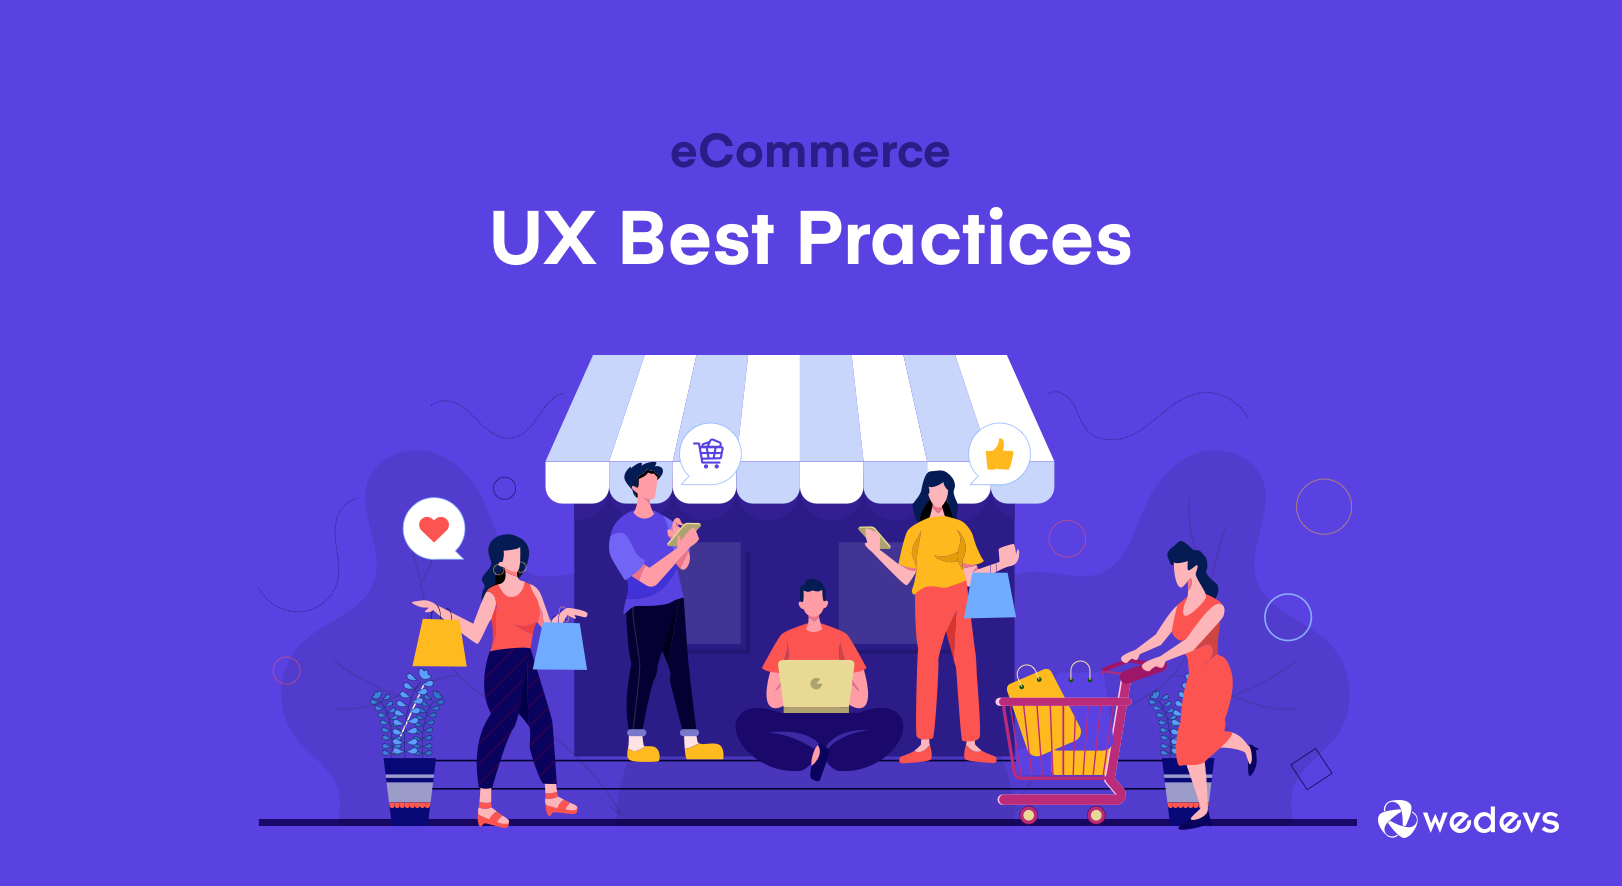 10 UX Best Practices to Improve Your eCommerce Customer Journey